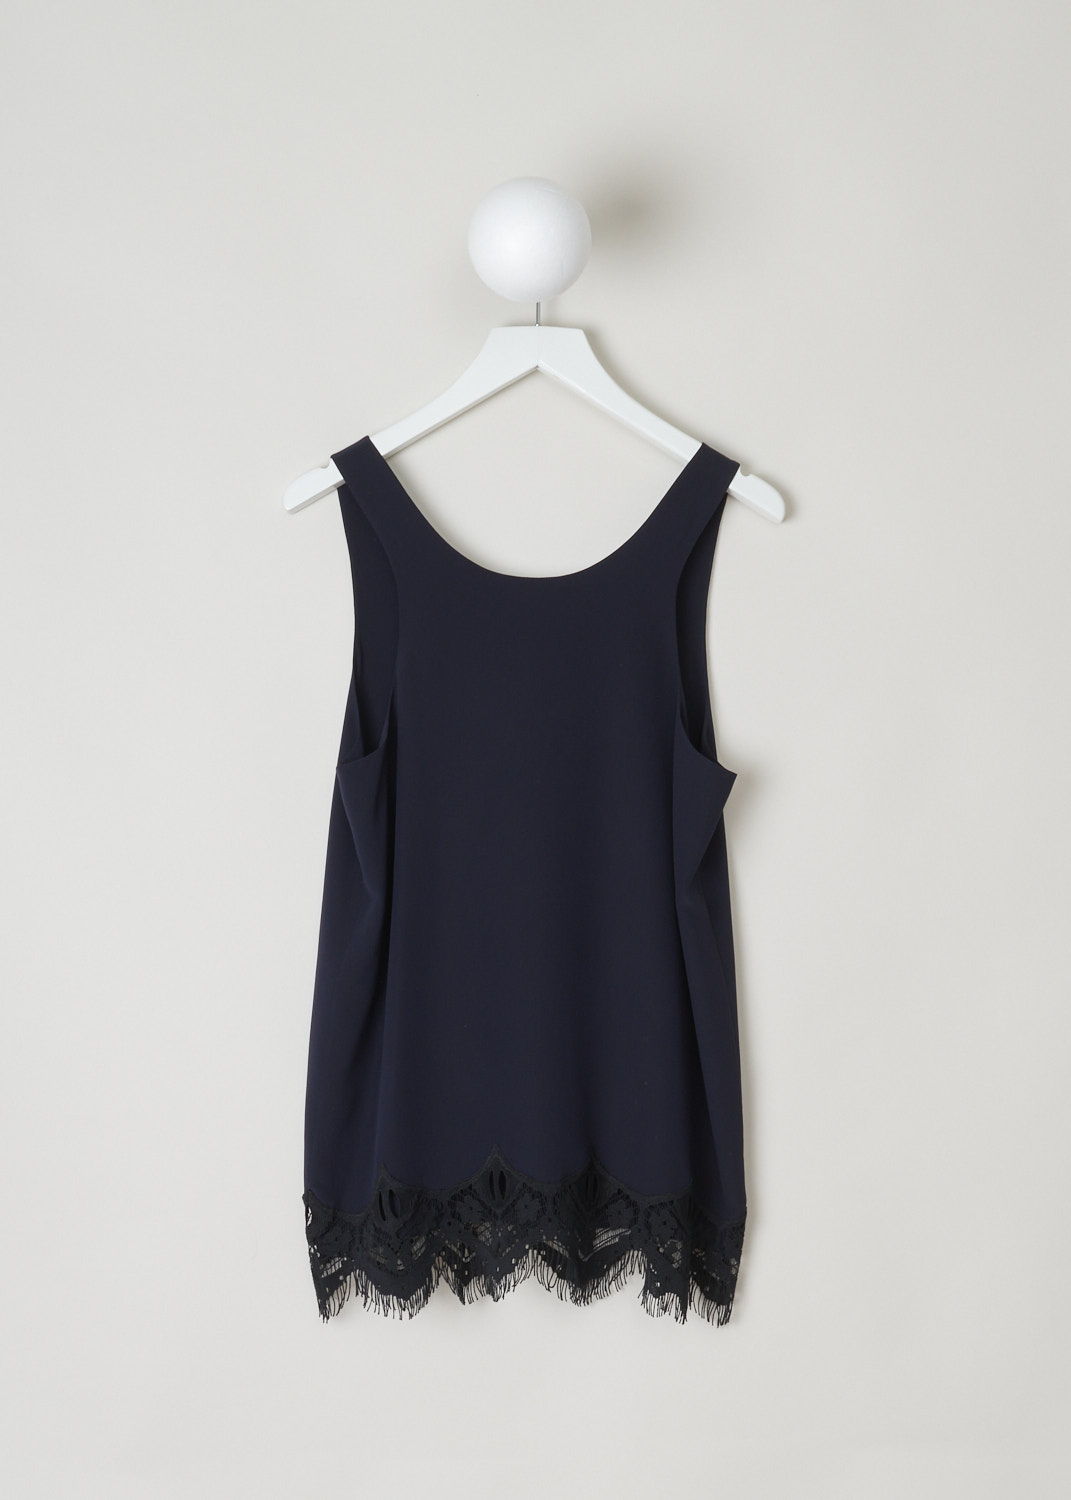 Chloé, Navy tank-top with black lace detailing, 16EHT92_16E004_7V1_navy_black, blue, back, A lovely basic being this navy tank-top. Featuring a scoop neckline, and has a lace decorated hem. 